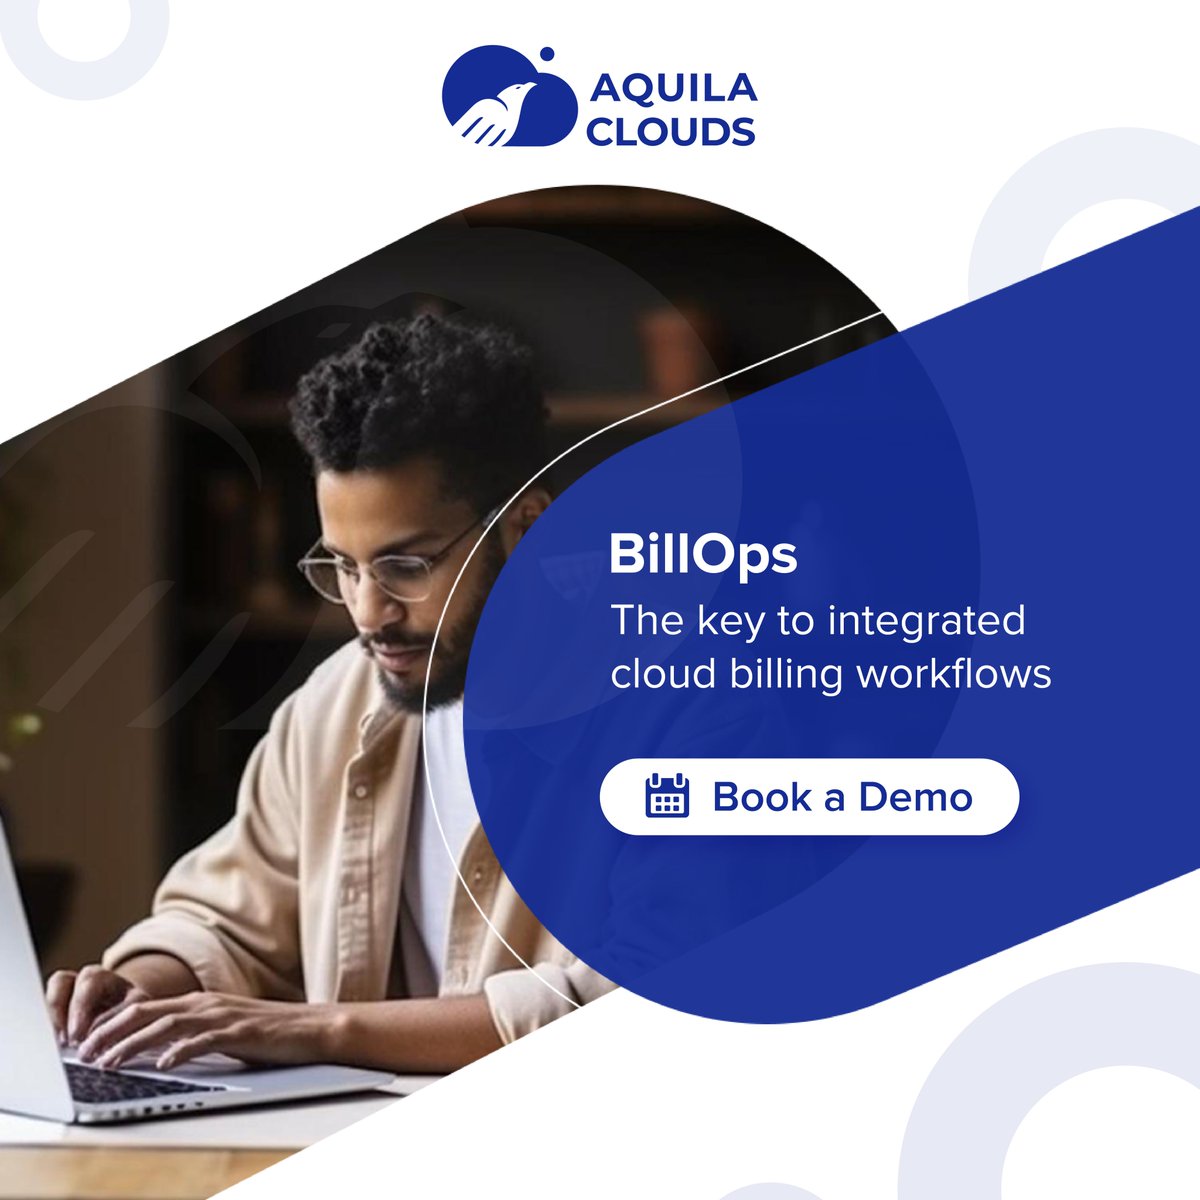 BillOps plays nice! Integrate with Connectwise, Okta, + more for billing efficiency 

Request a Demo: lnkd.in/djHkrpv

#cloudbilling #integrations #workflow